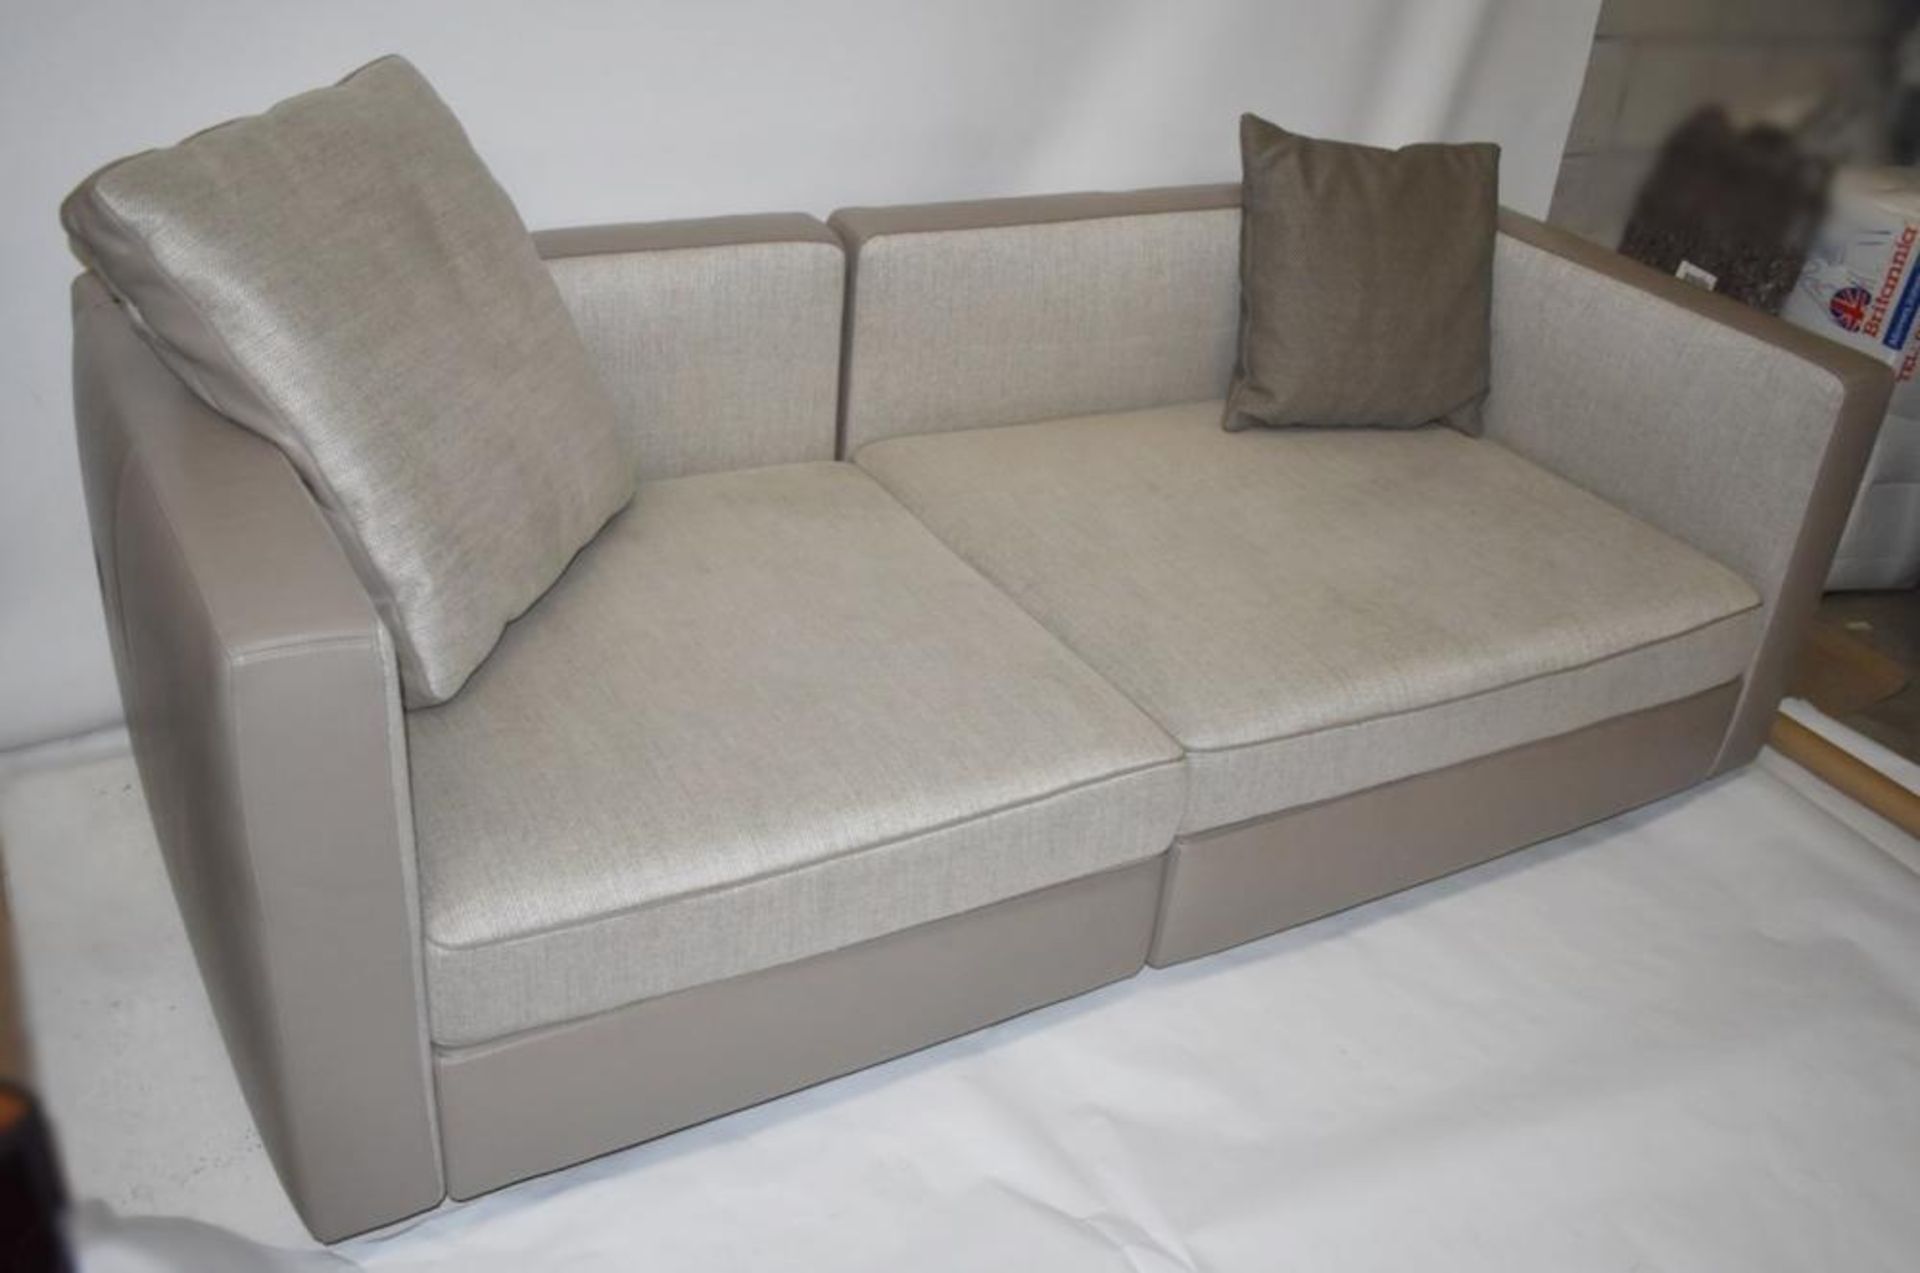 1 x POLTRONA FRAU 2-Section Modular Sofa - In Grey Fabric And Leather - Original RRP £5,639 - Image 7 of 9